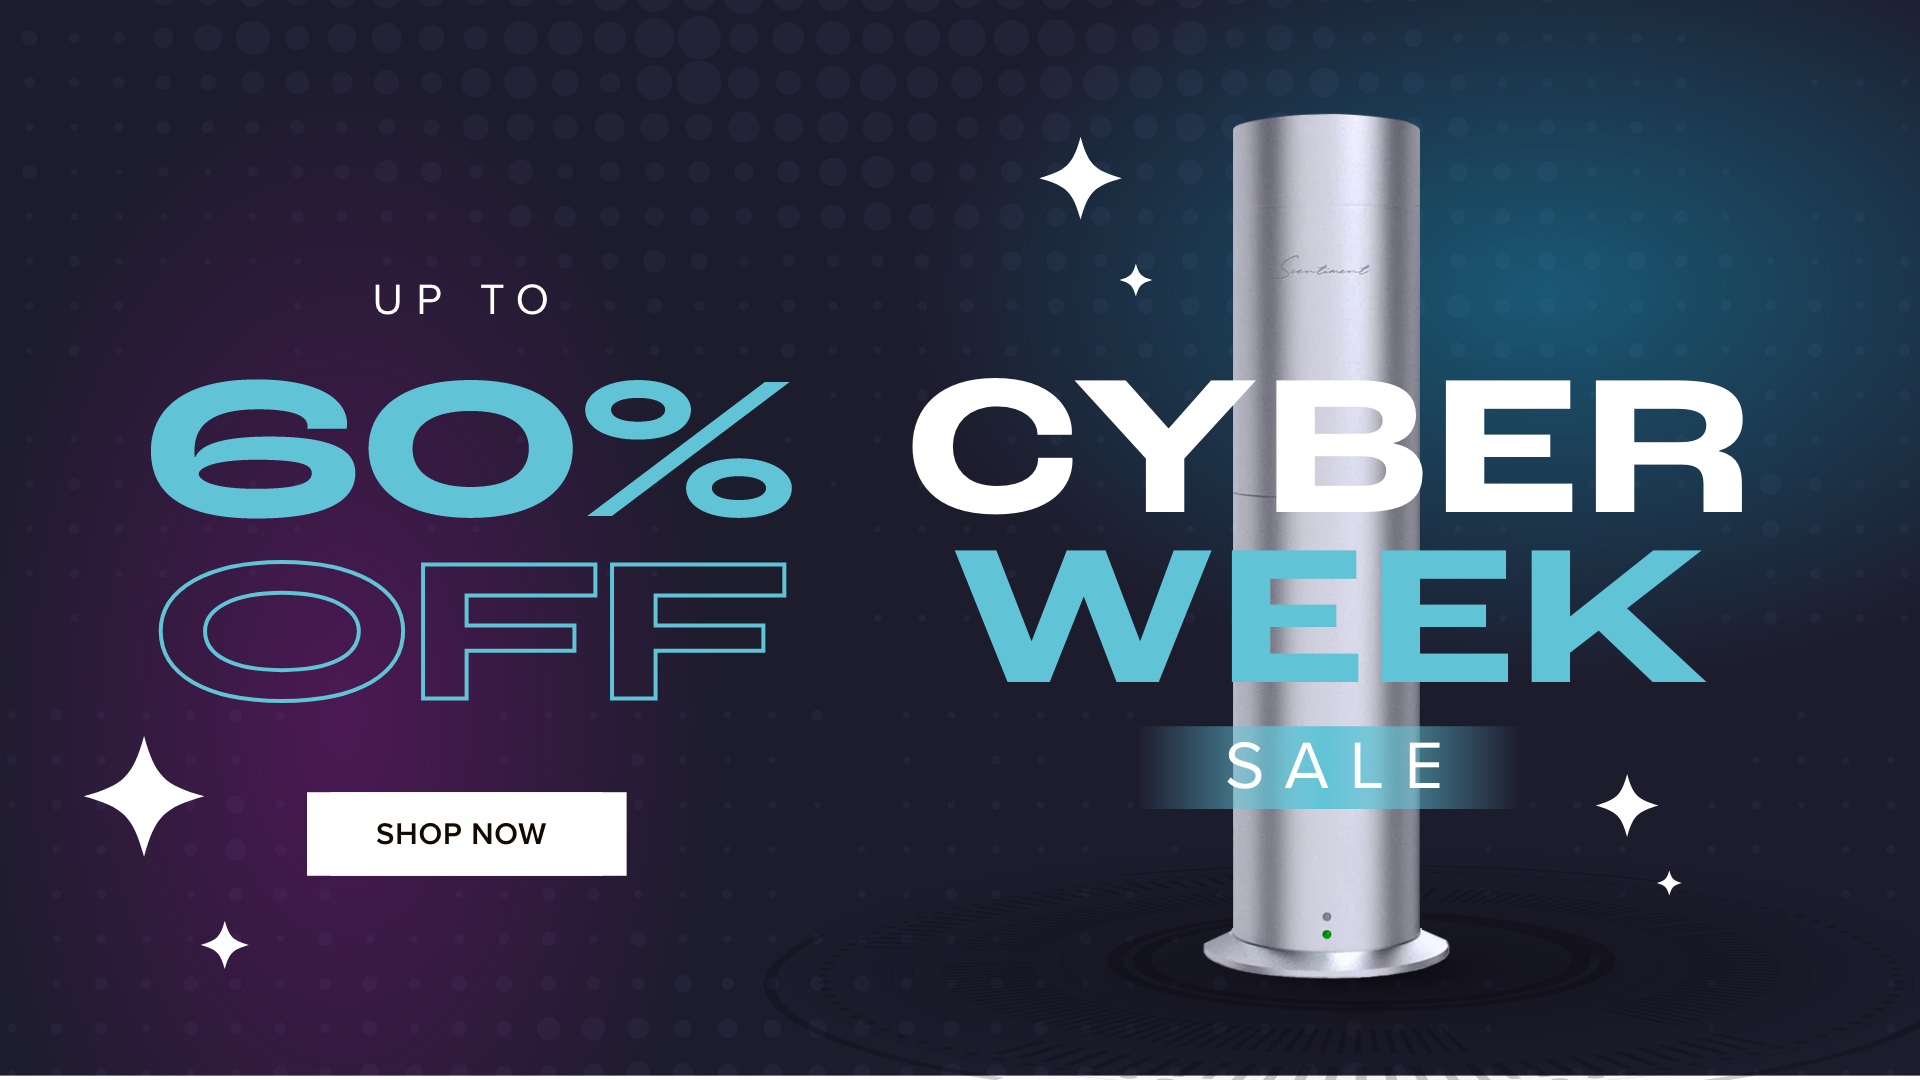 Cyber Week: Up to 60% OFF! Shop Now